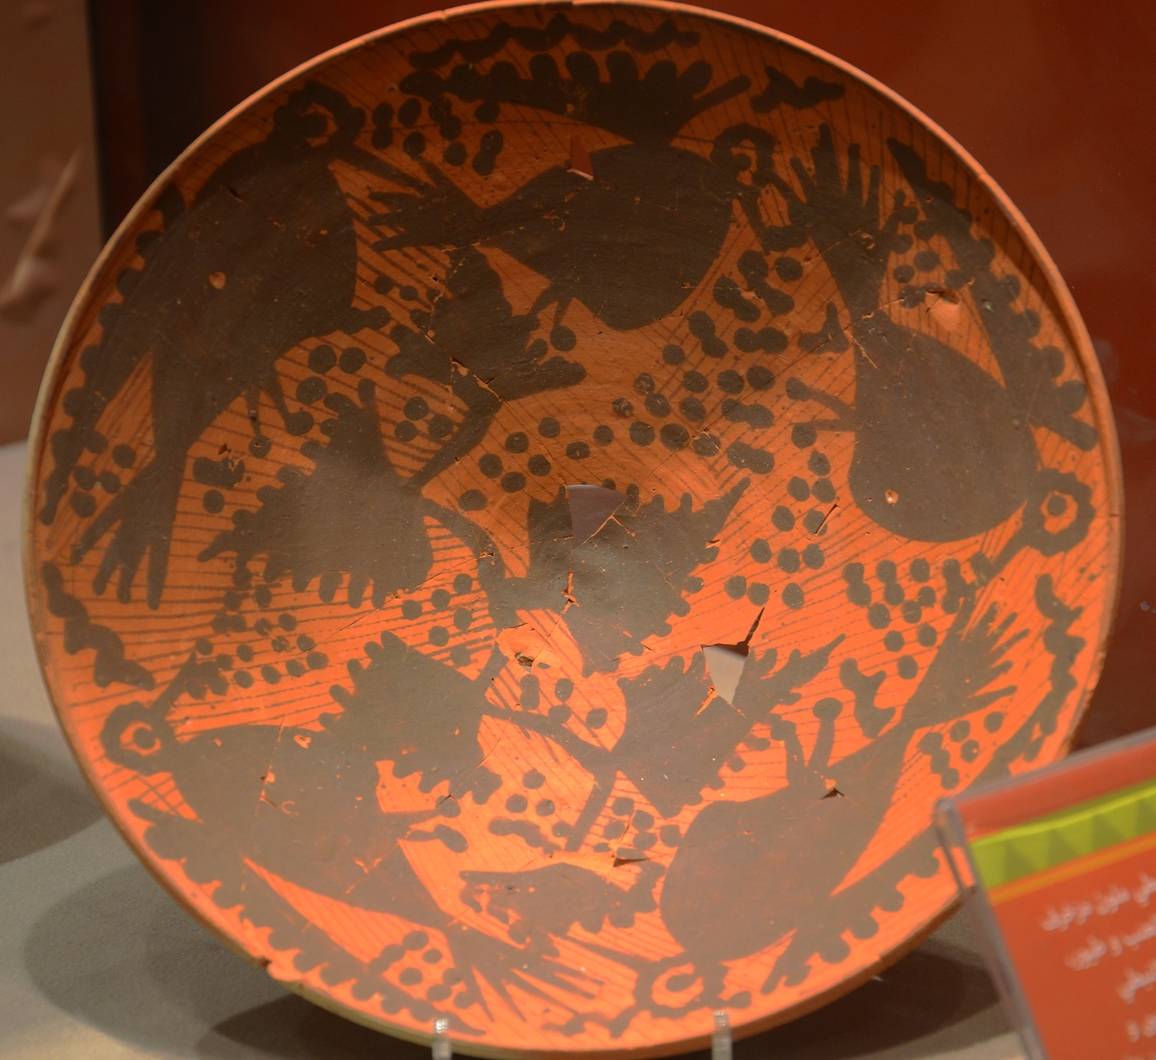 This Nabataean fineware plate, carefully painted with birds eating grapes, offers Petra’s visitors a striking glimpse into the skill and craftsmanship of Petra’s ancient artisans. Photo by Allison Mickel.